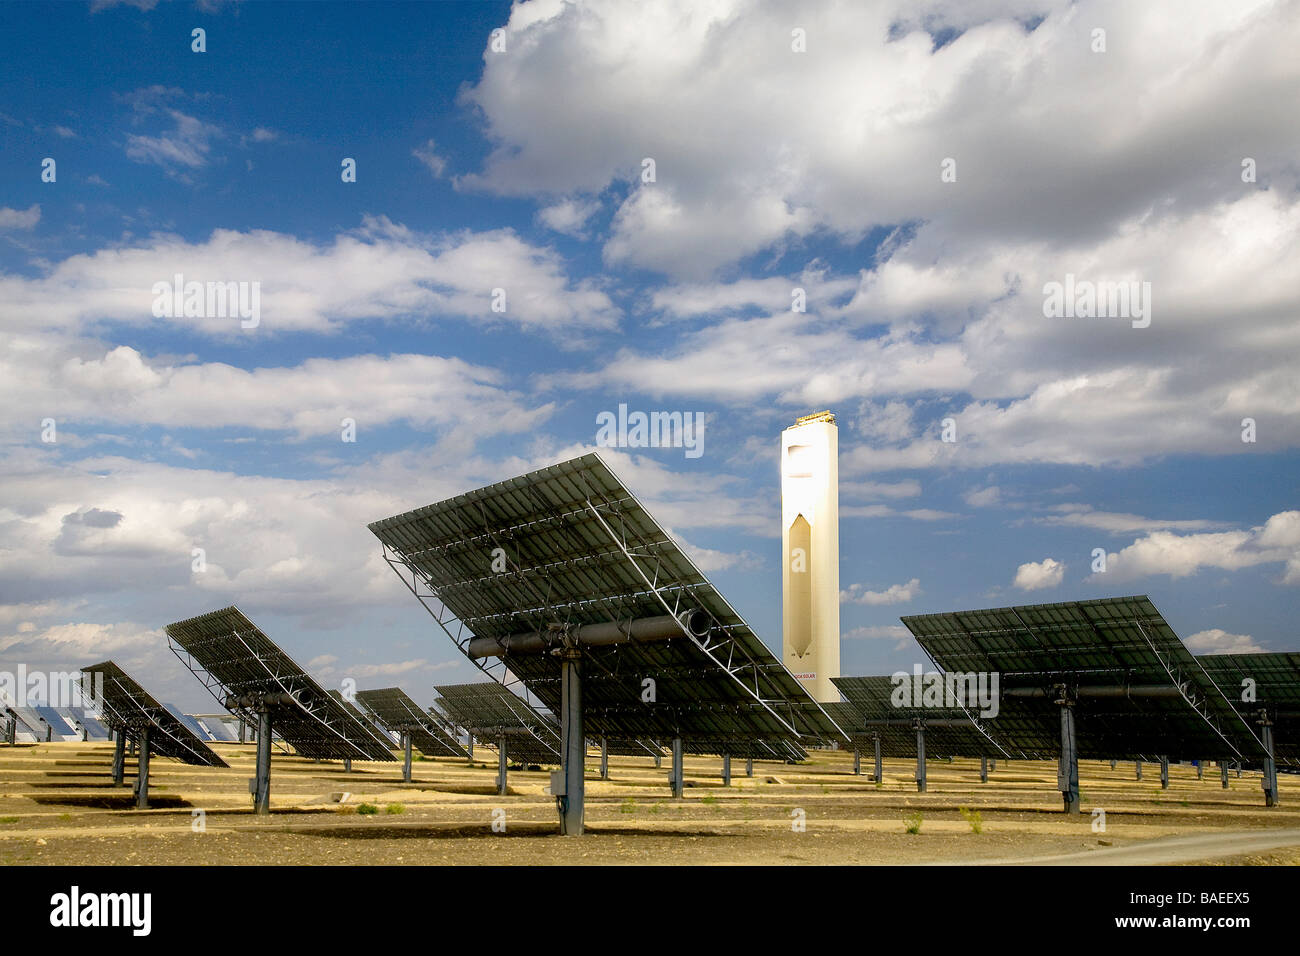 Mirrors reflect sunlight onto the world's first commercial thermoelectric solar tower plant, near Seville, Spain Stock Photo